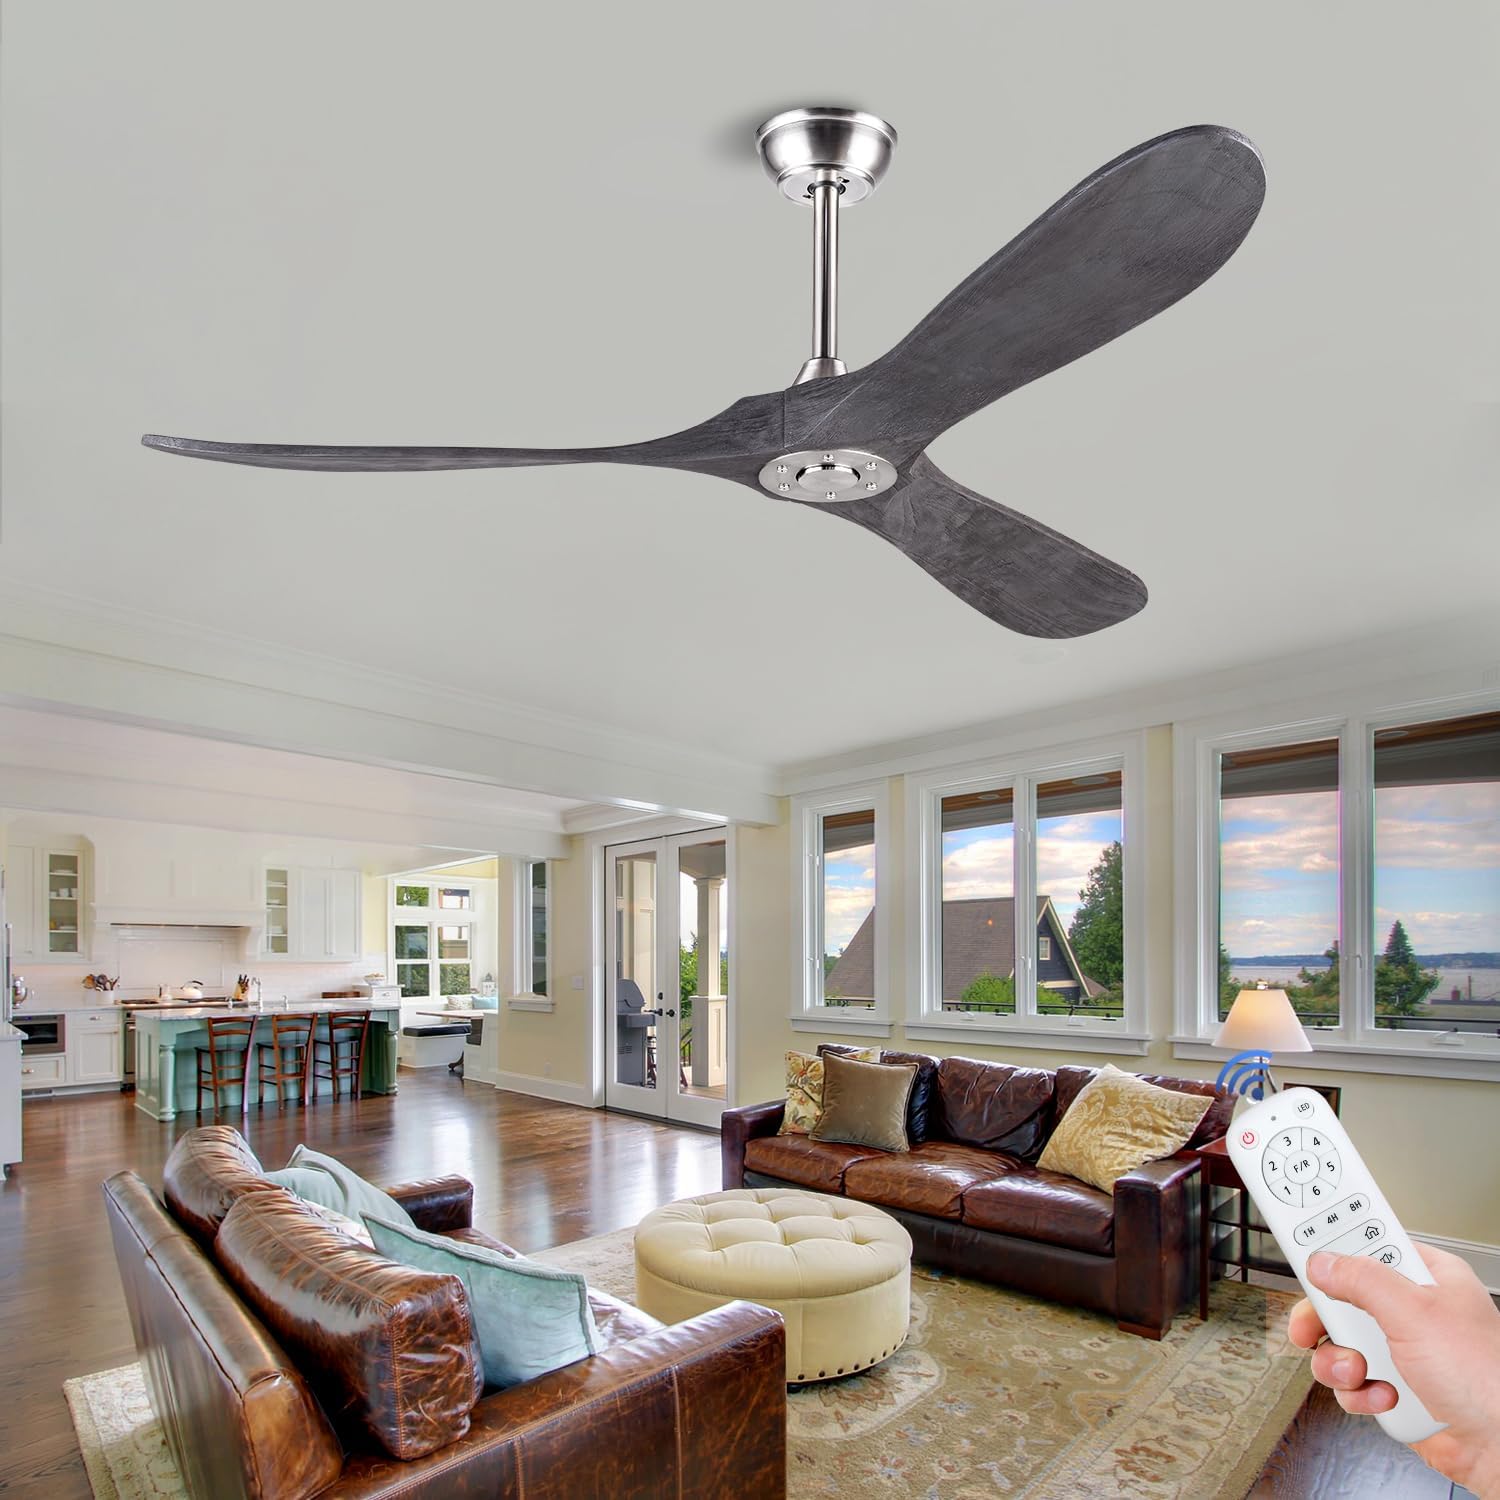 BOJUE 60 Wood Ceiling Fan Without Light Remote Control, Low Profile Ceiling Fan Indoor Outdoor with 3 blade for Patio Living Room, Bedroom, Office, Summer House, Etc (Gray Drawing Lines Blades)